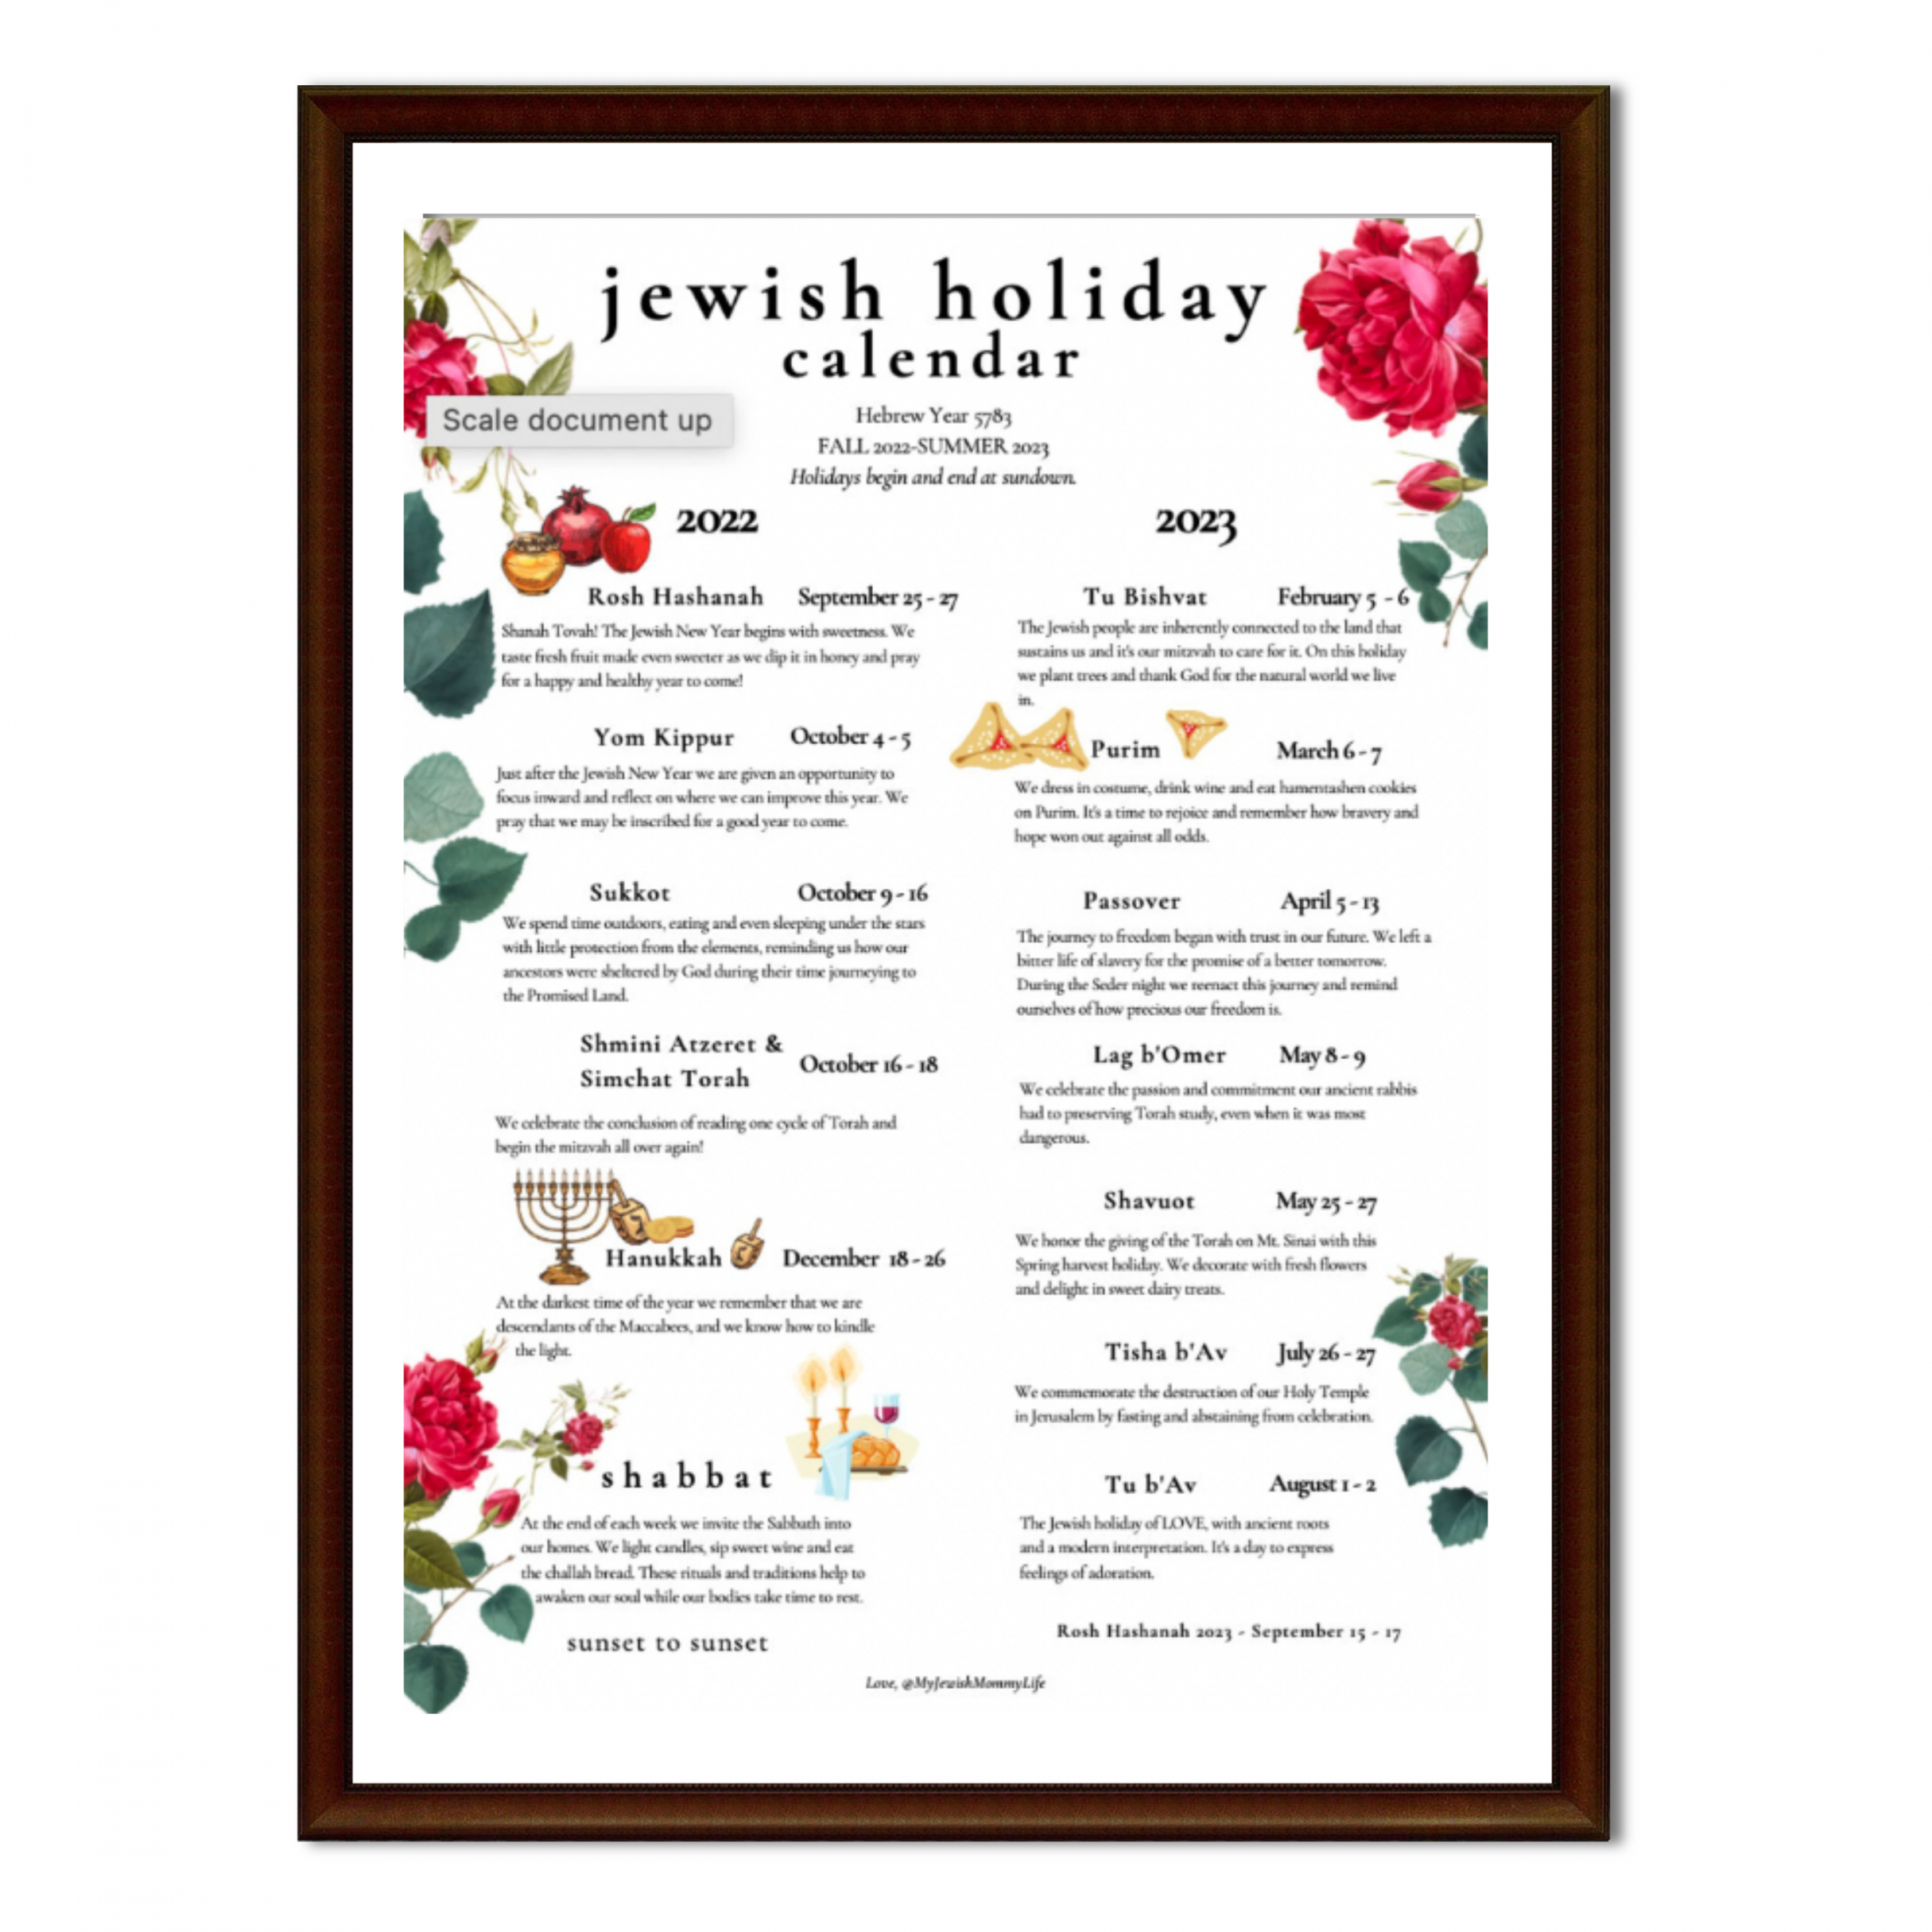 NEW* Jewish Holiday Calendar for / Hebrew Year  is